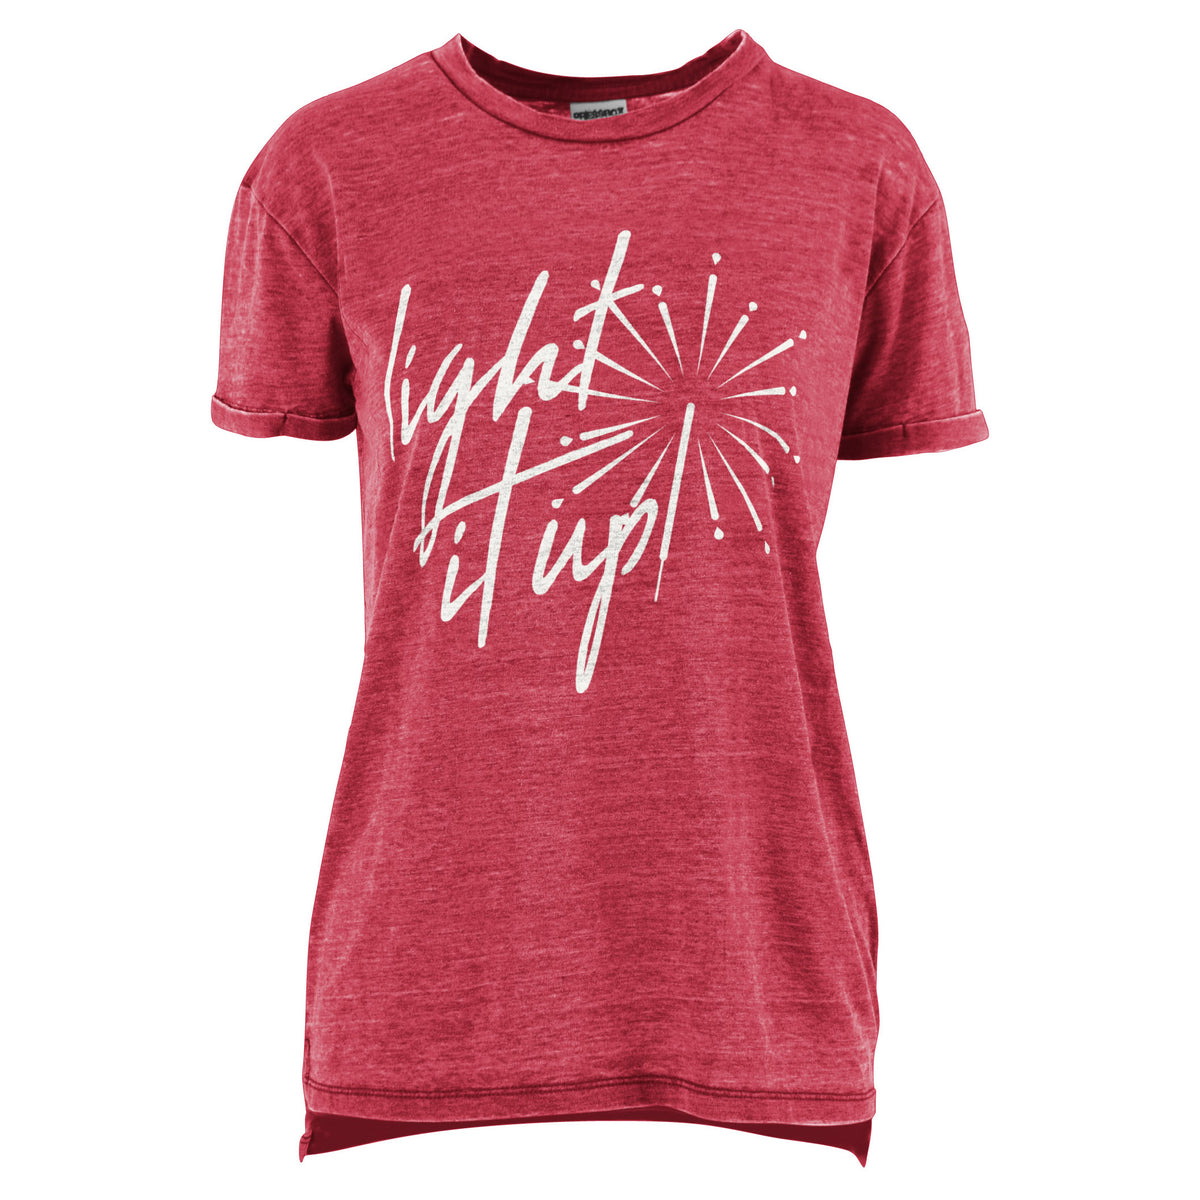 Light It Up Vintage Washed Tee